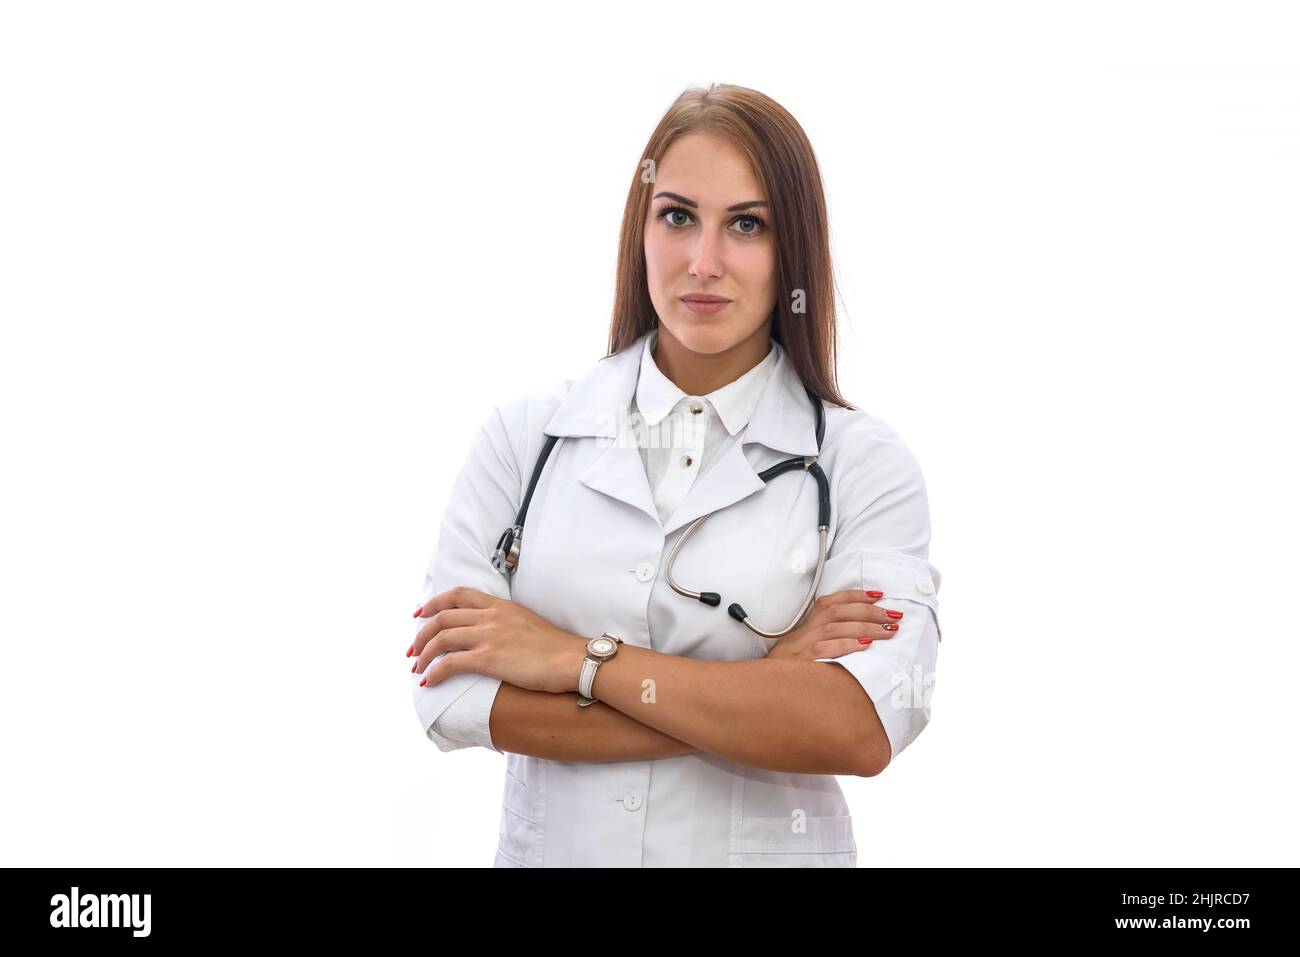 Medical worker. Beautiful woman in medical coat posing isolated on white background Stock Photo